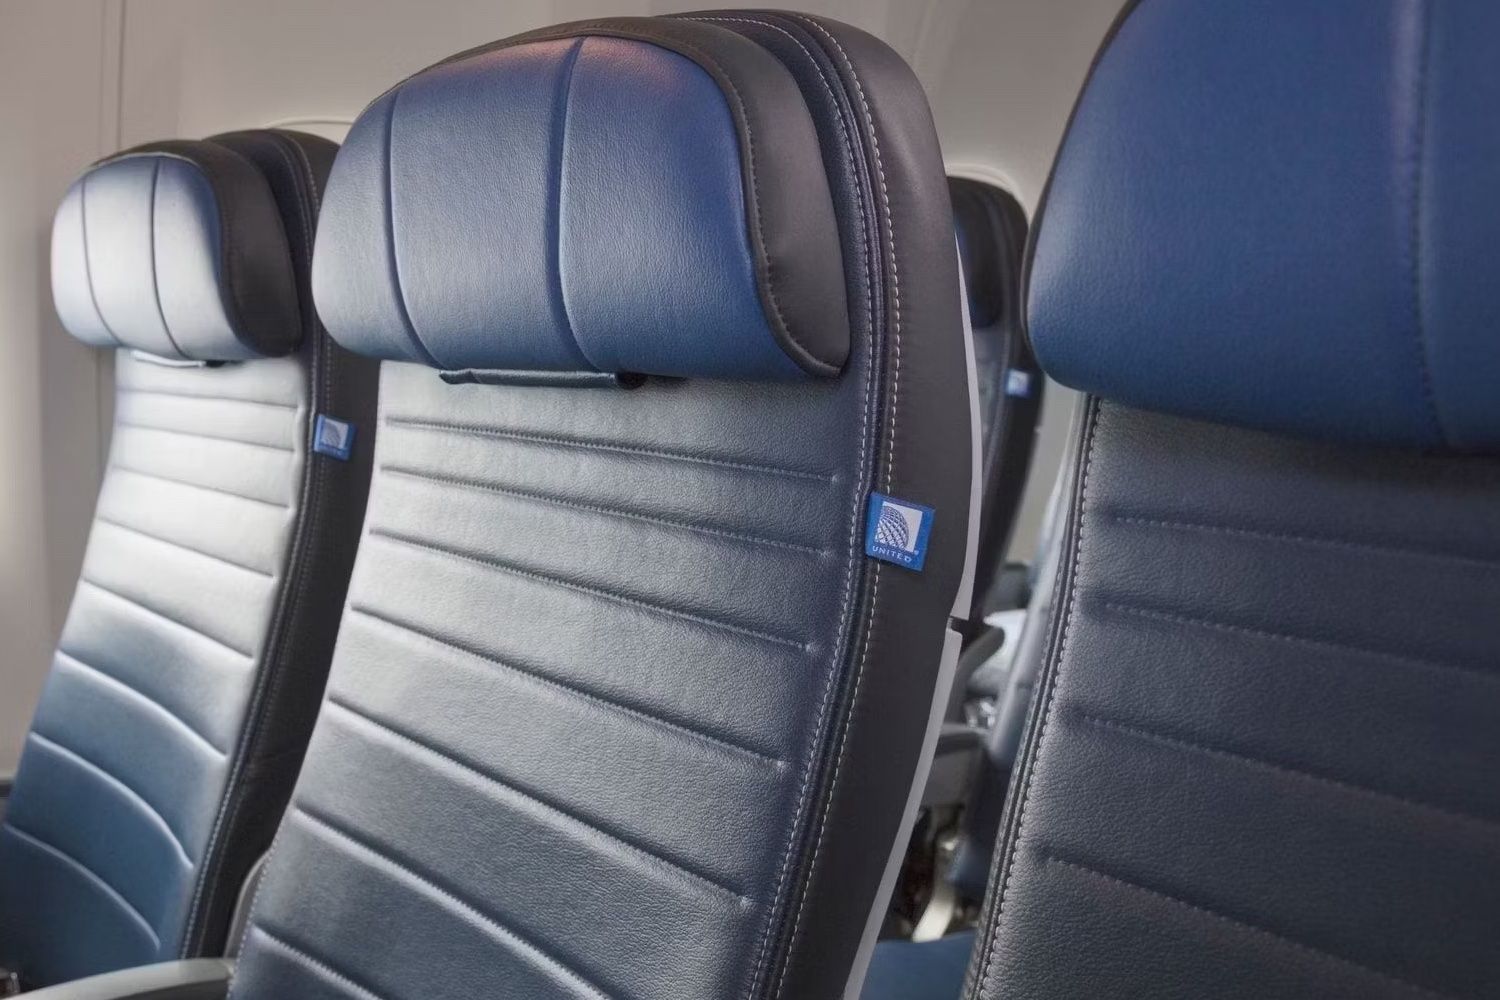 Three United Airlines economy class seats.